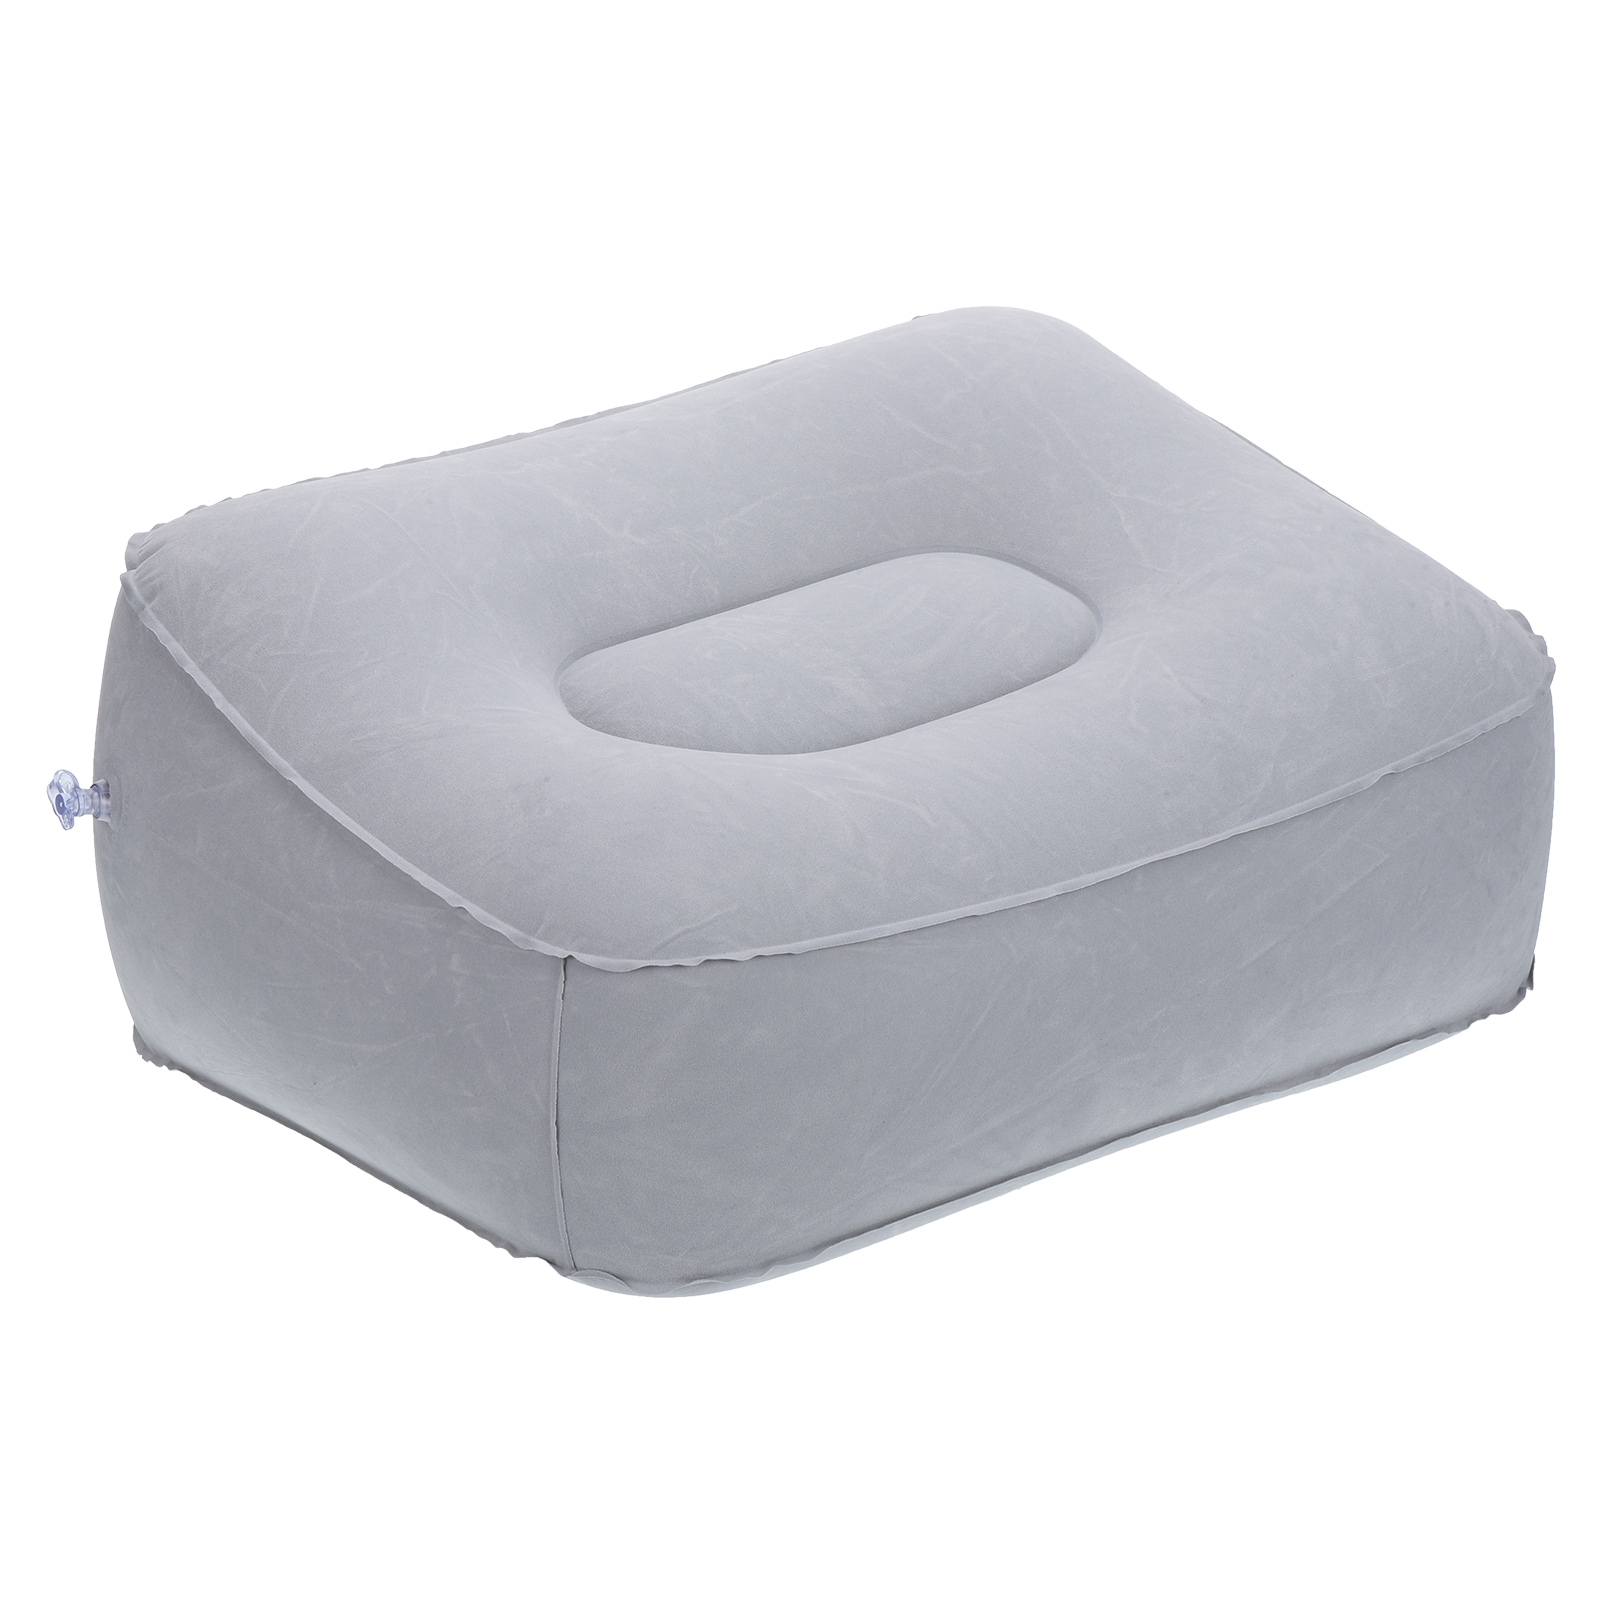 https://ak1.ostkcdn.com/images/products/is/images/direct/ab7a3cb000ff96f7f32d6534cab7756460003325/Travel-Foot-Rest-Pillow%2C-Inflatable-Foot-Rest-Airplane-Cushion%2C-Gray.jpg